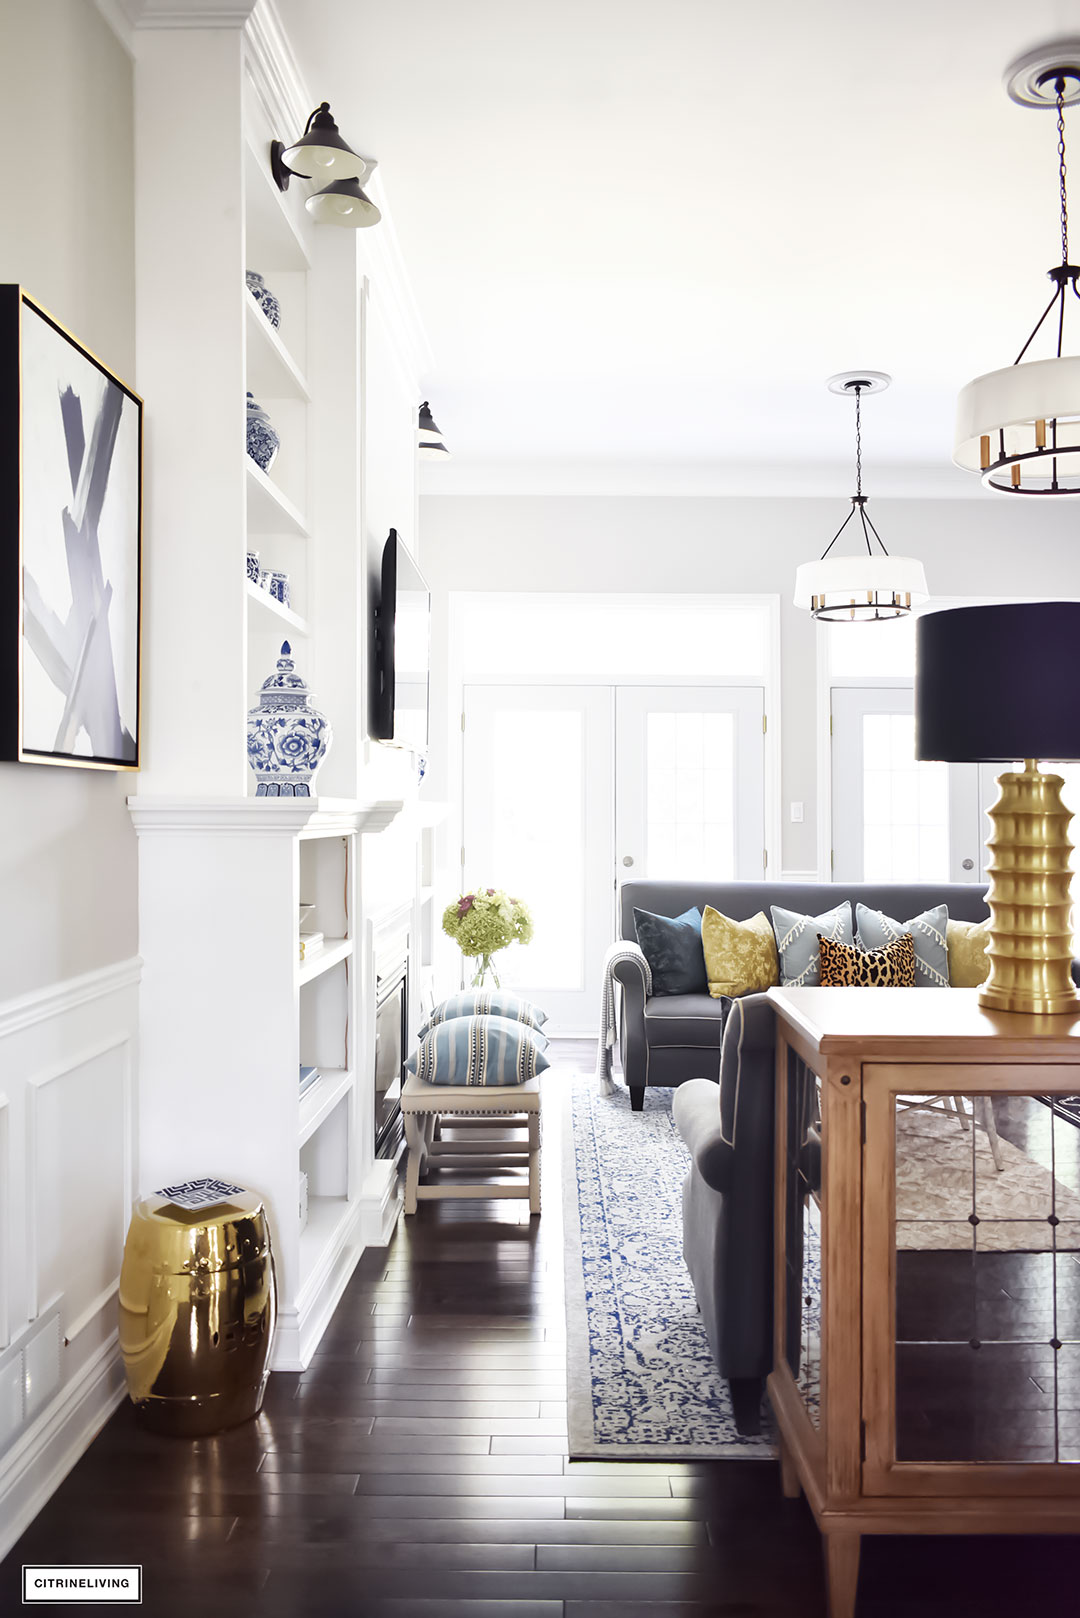 FALL HOME TOUR USING RICH COLORS, BRASS AND GOLD